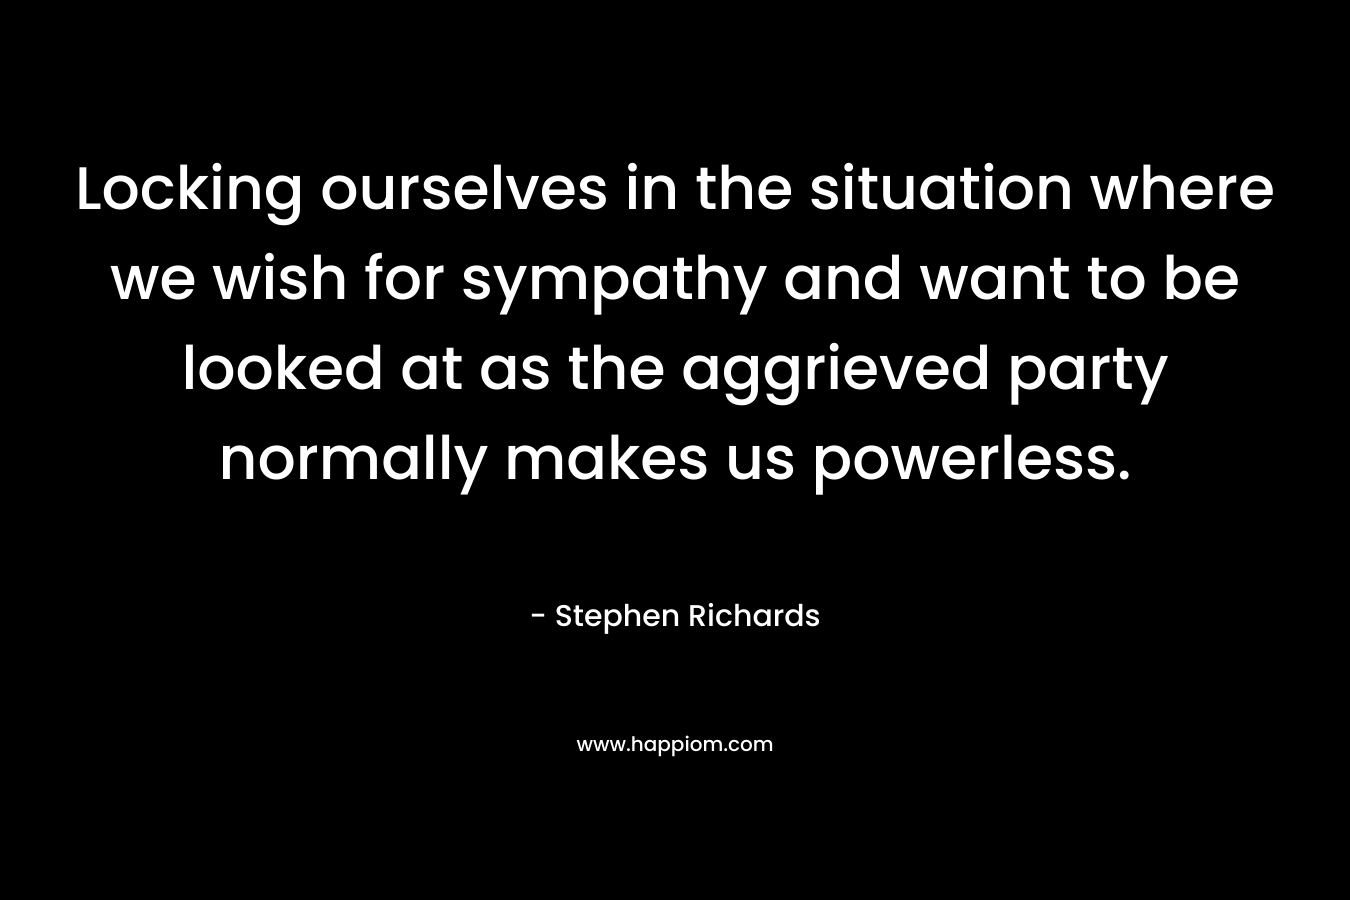 Locking ourselves in the situation where we wish for sympathy and want to be looked at as the aggrieved party normally makes us powerless. – Stephen Richards